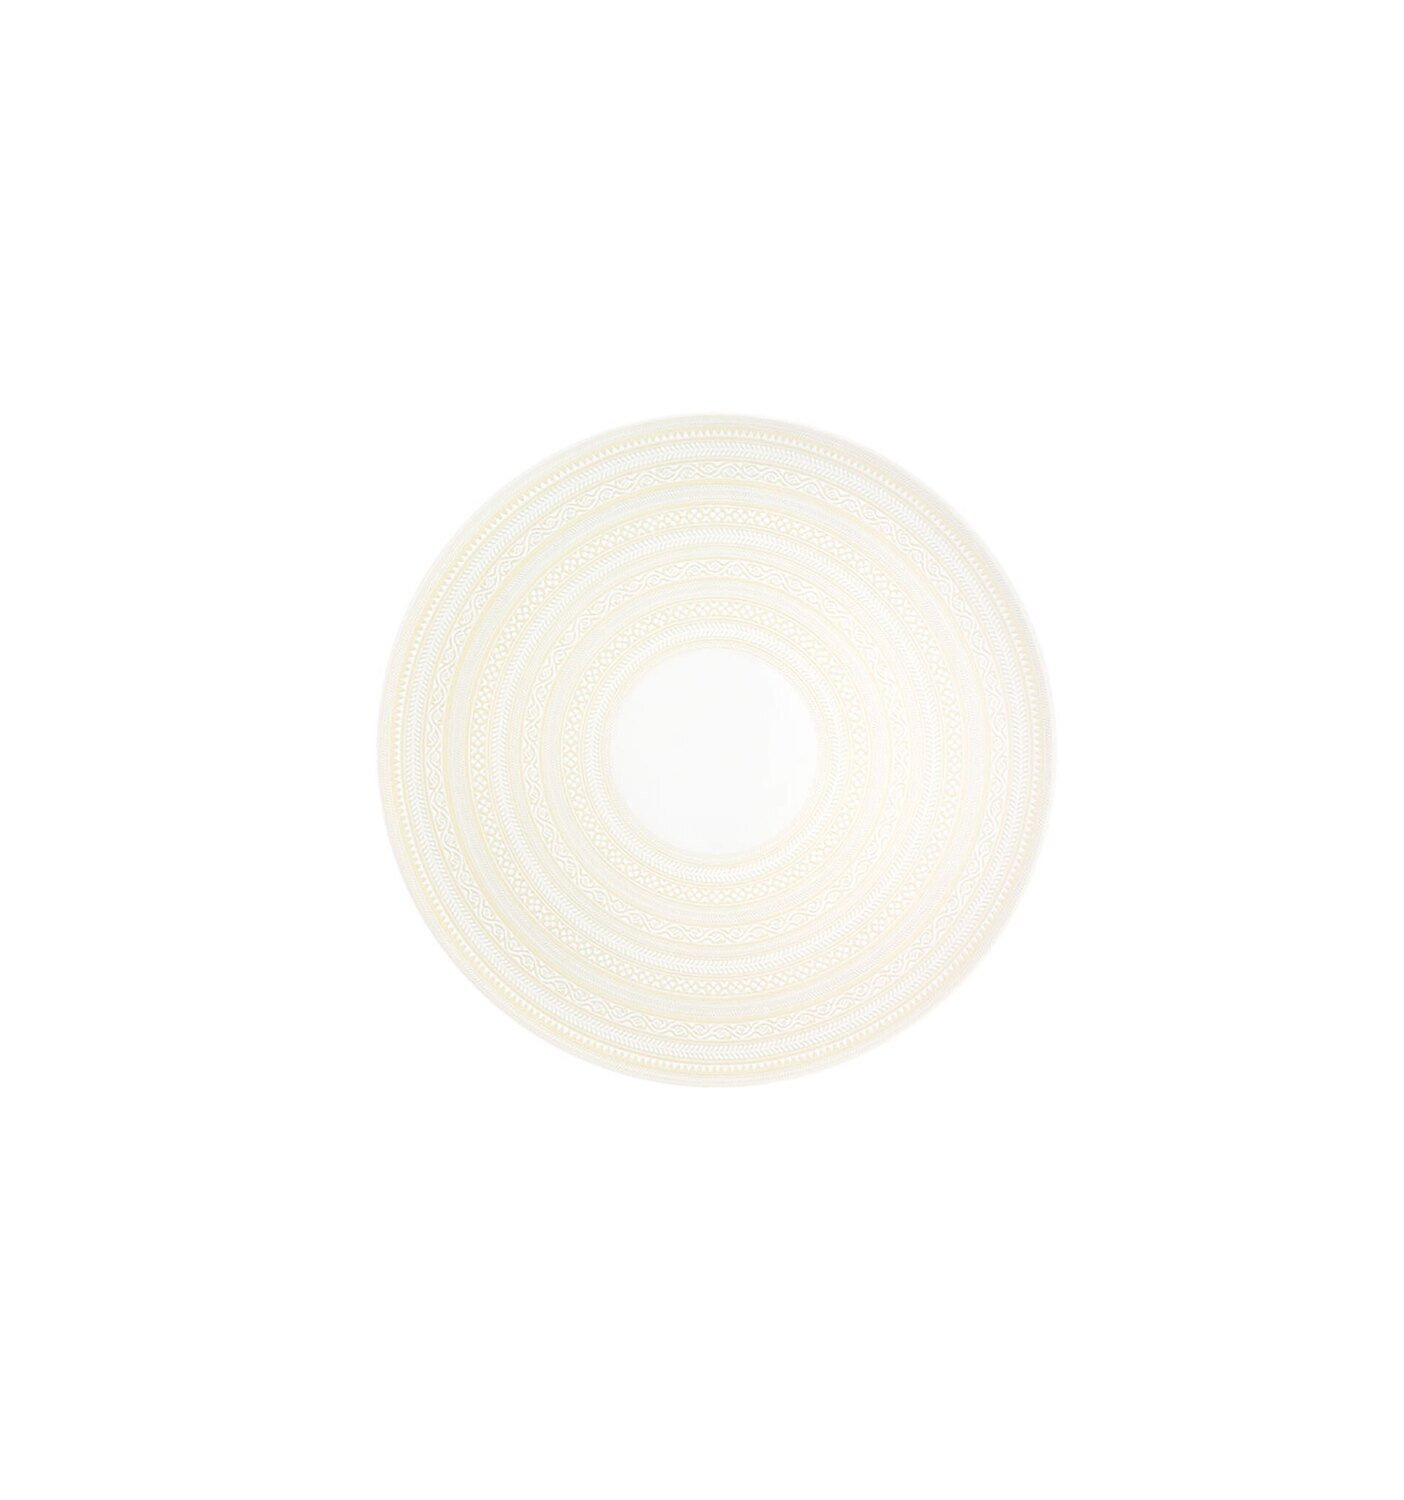 Vista Alegre Ivory Charger Plate 21134803